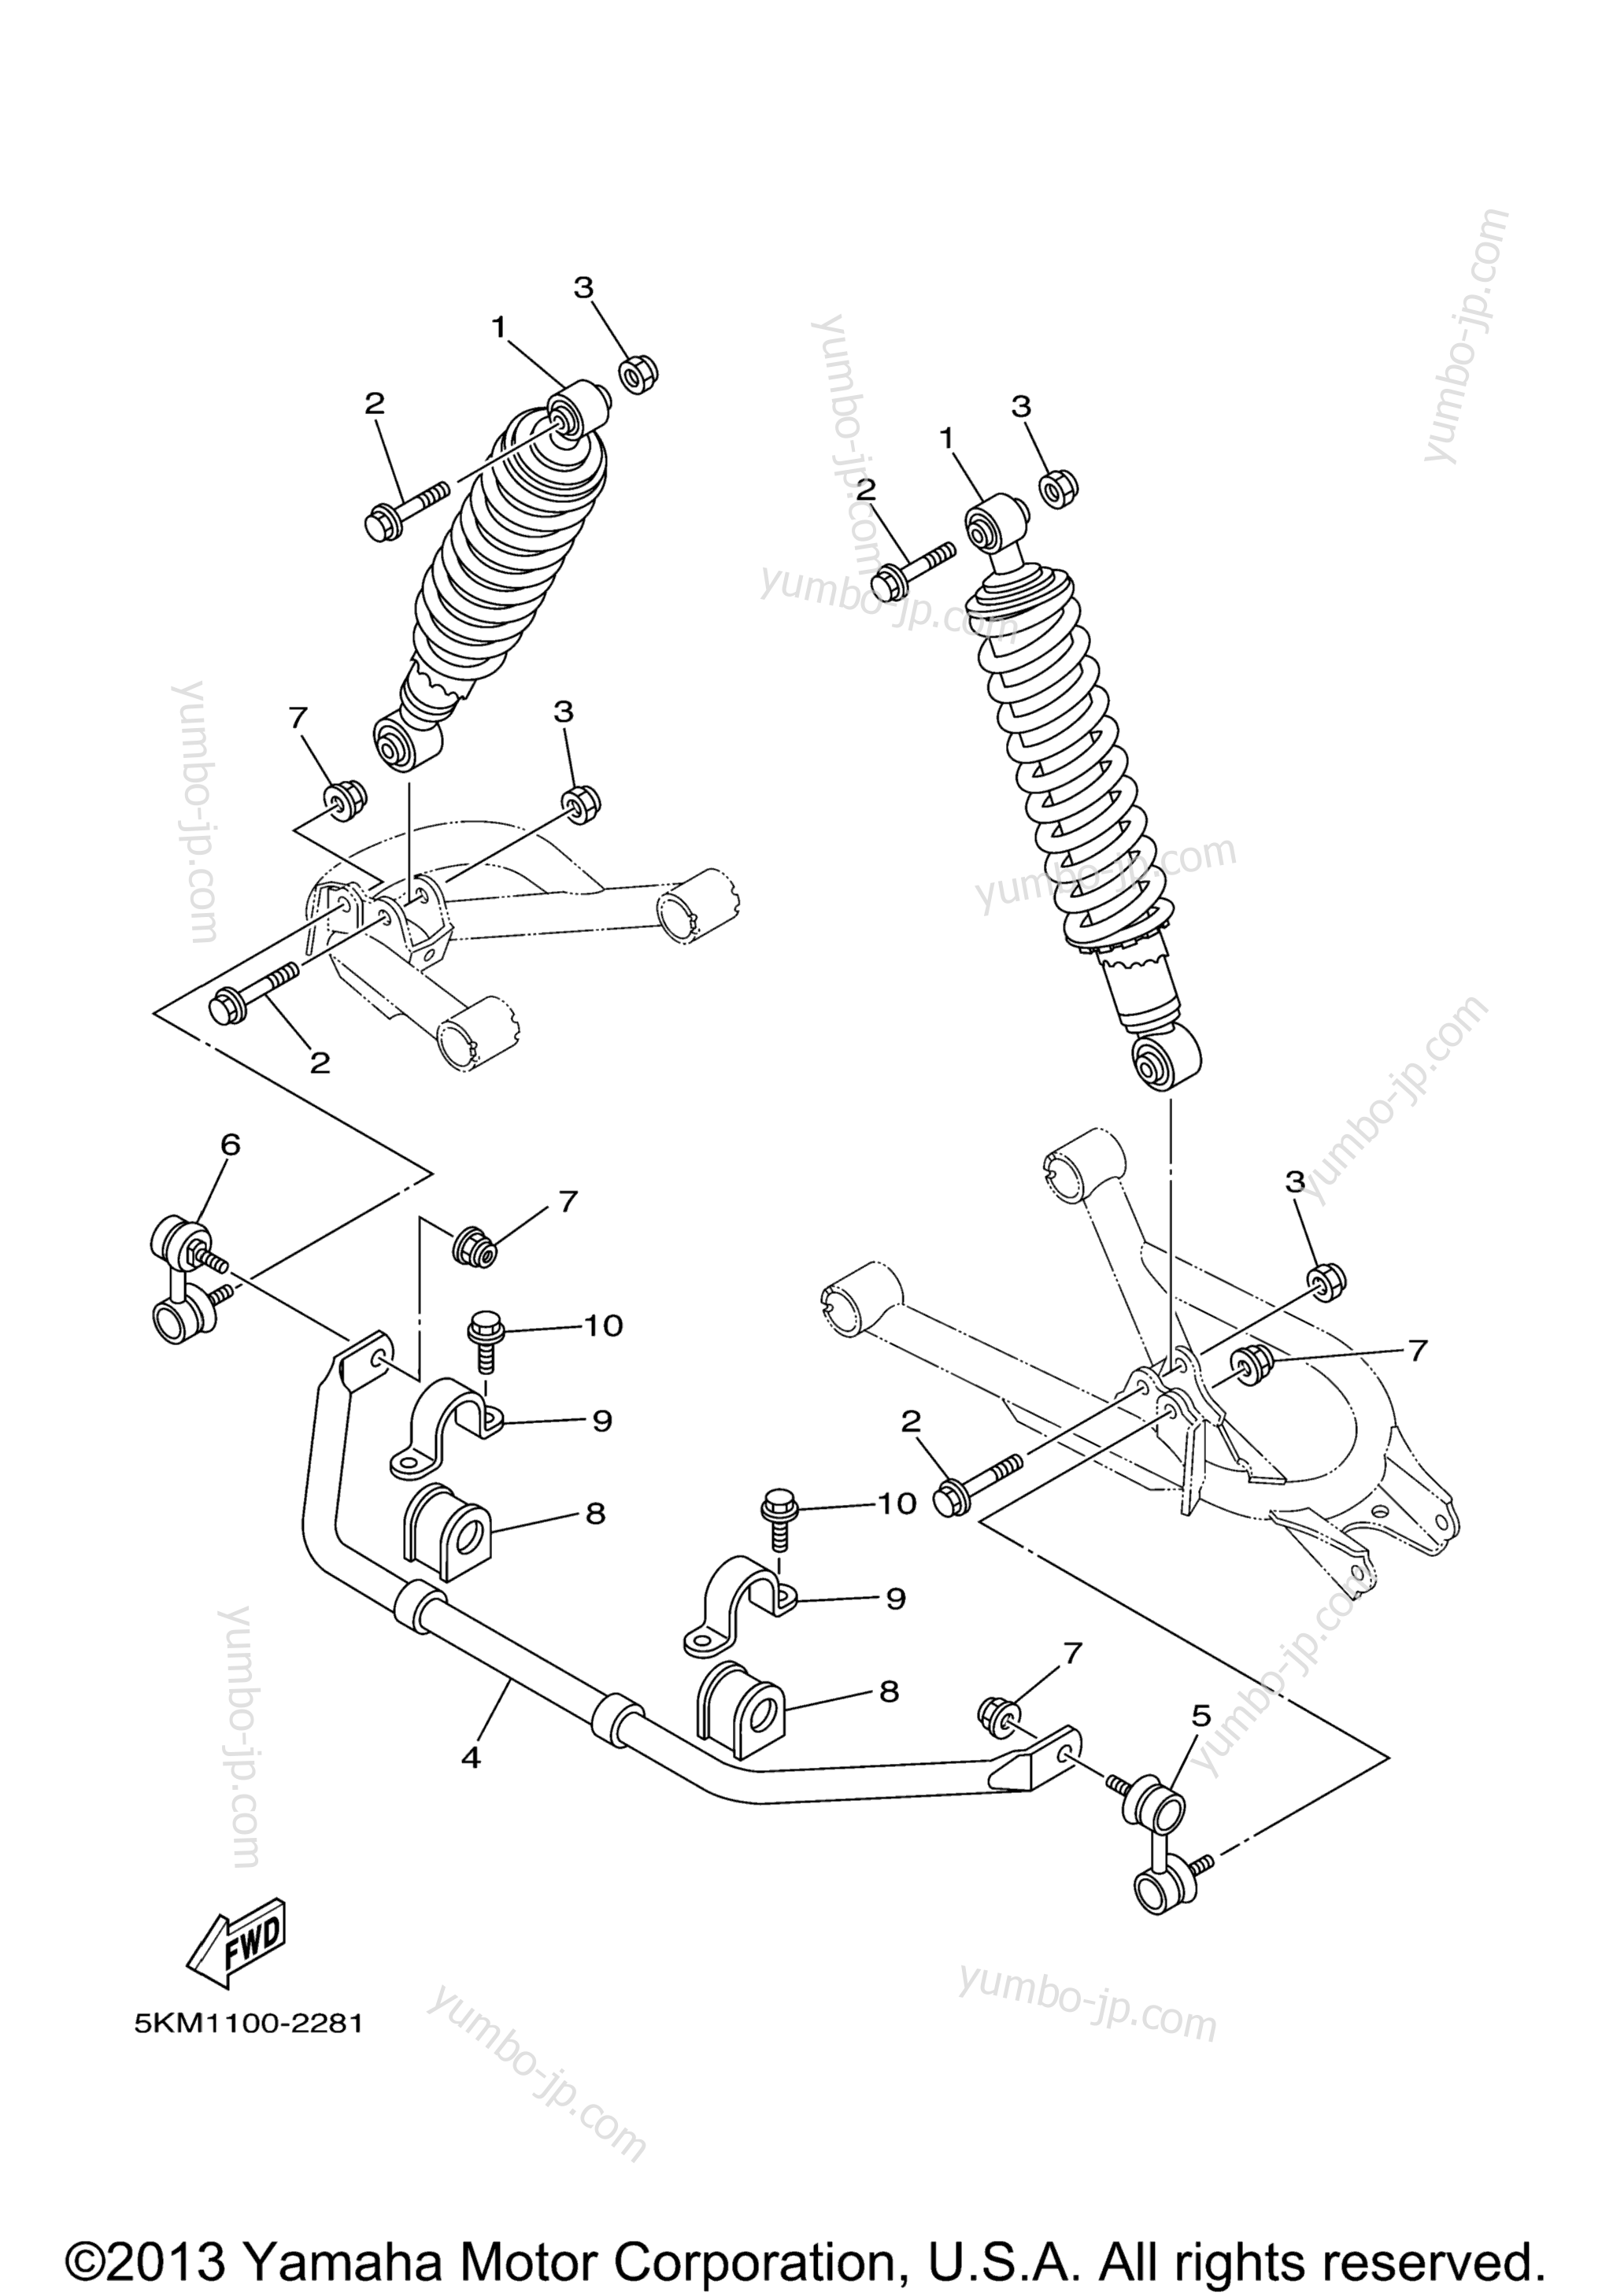 Rear Suspension for ATVs YAMAHA GRIZZLY 660 (YFM66FGXGR) 2008 year